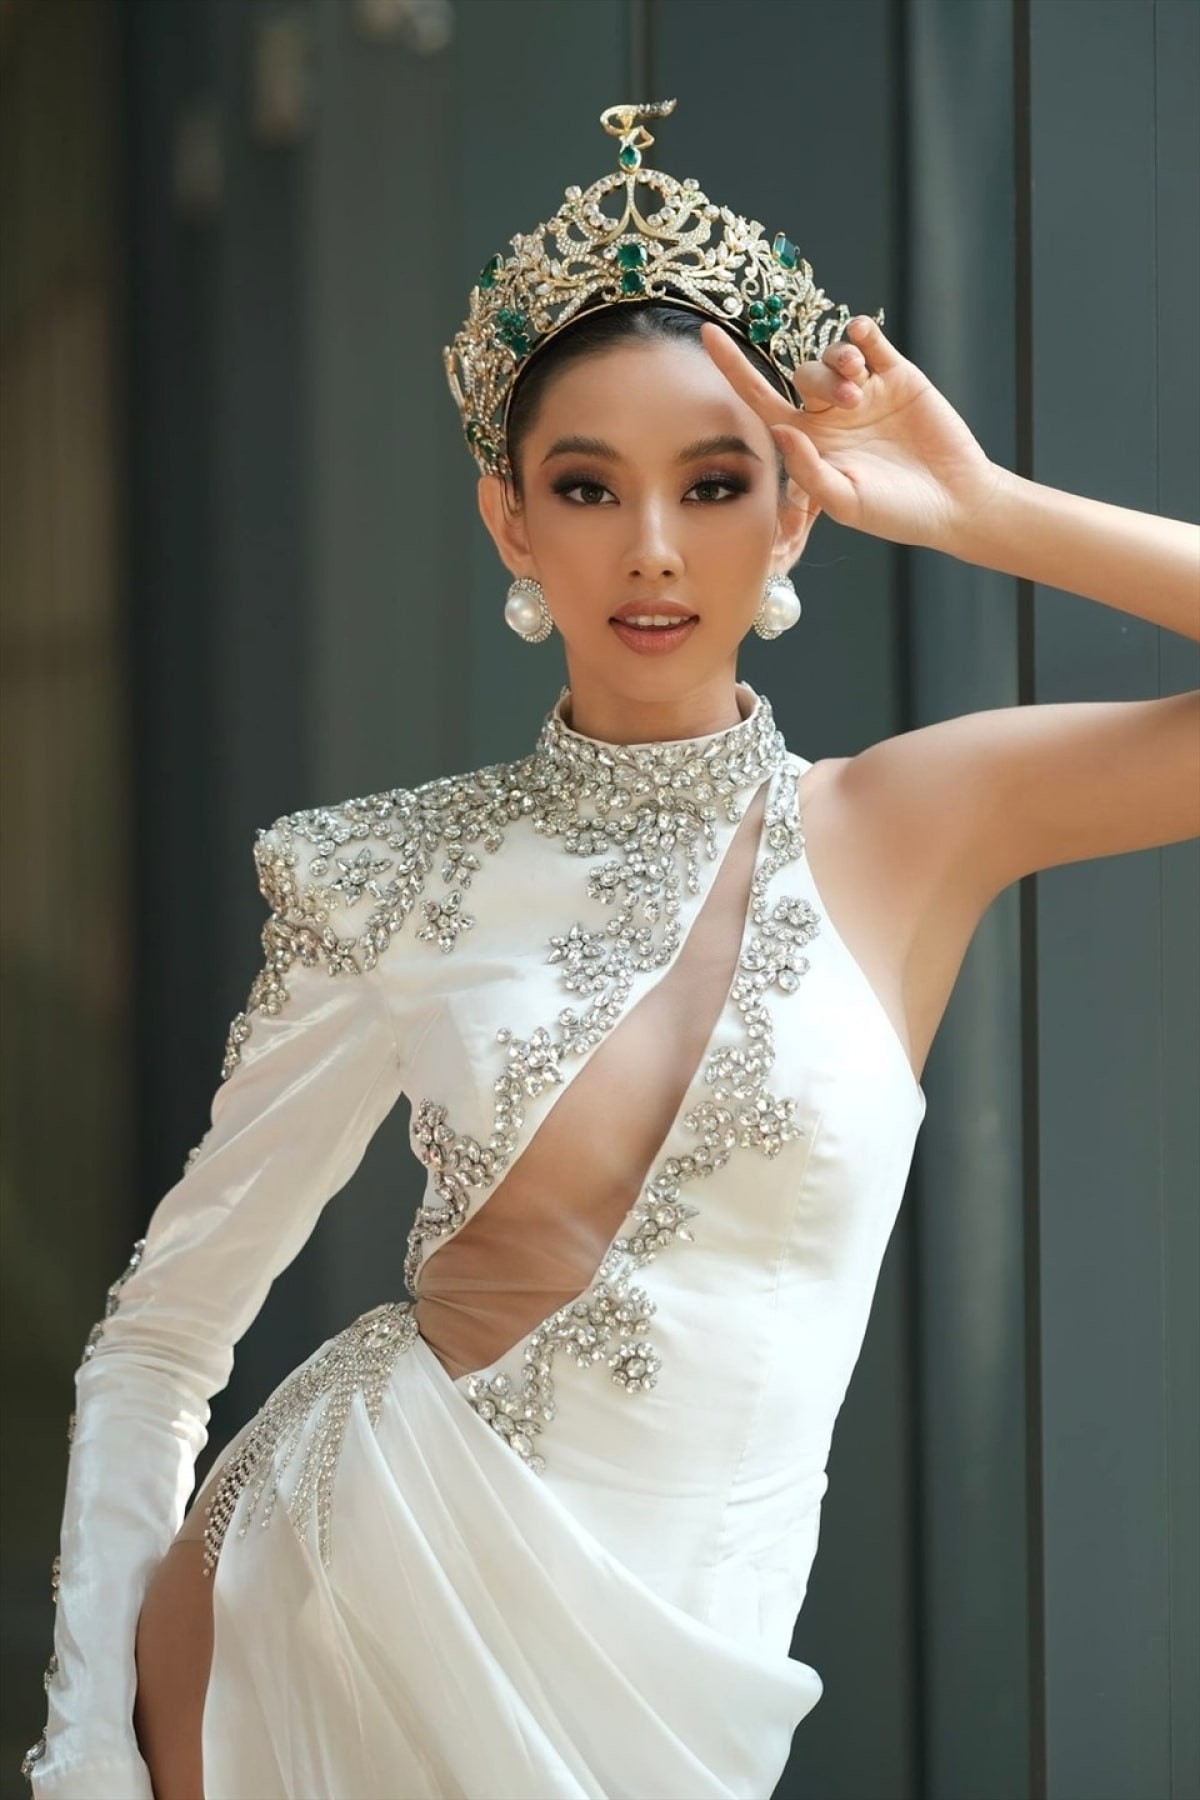 Well-deserved Reputation for Vietnam at Global Beauty Competitions